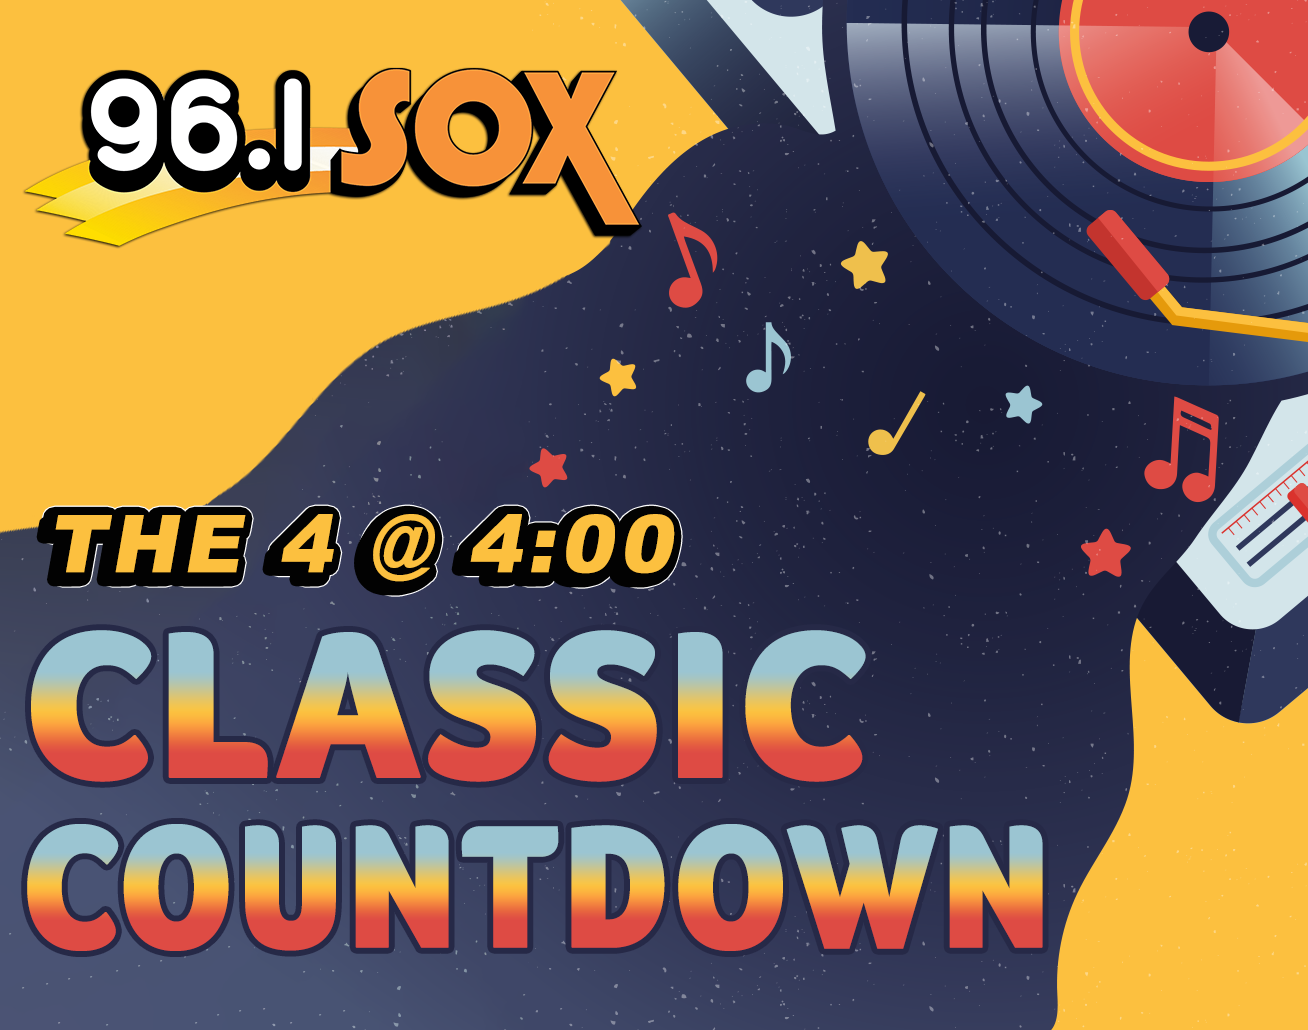 The 4 at 4:00 Classic Countdown on 96.1 SOX